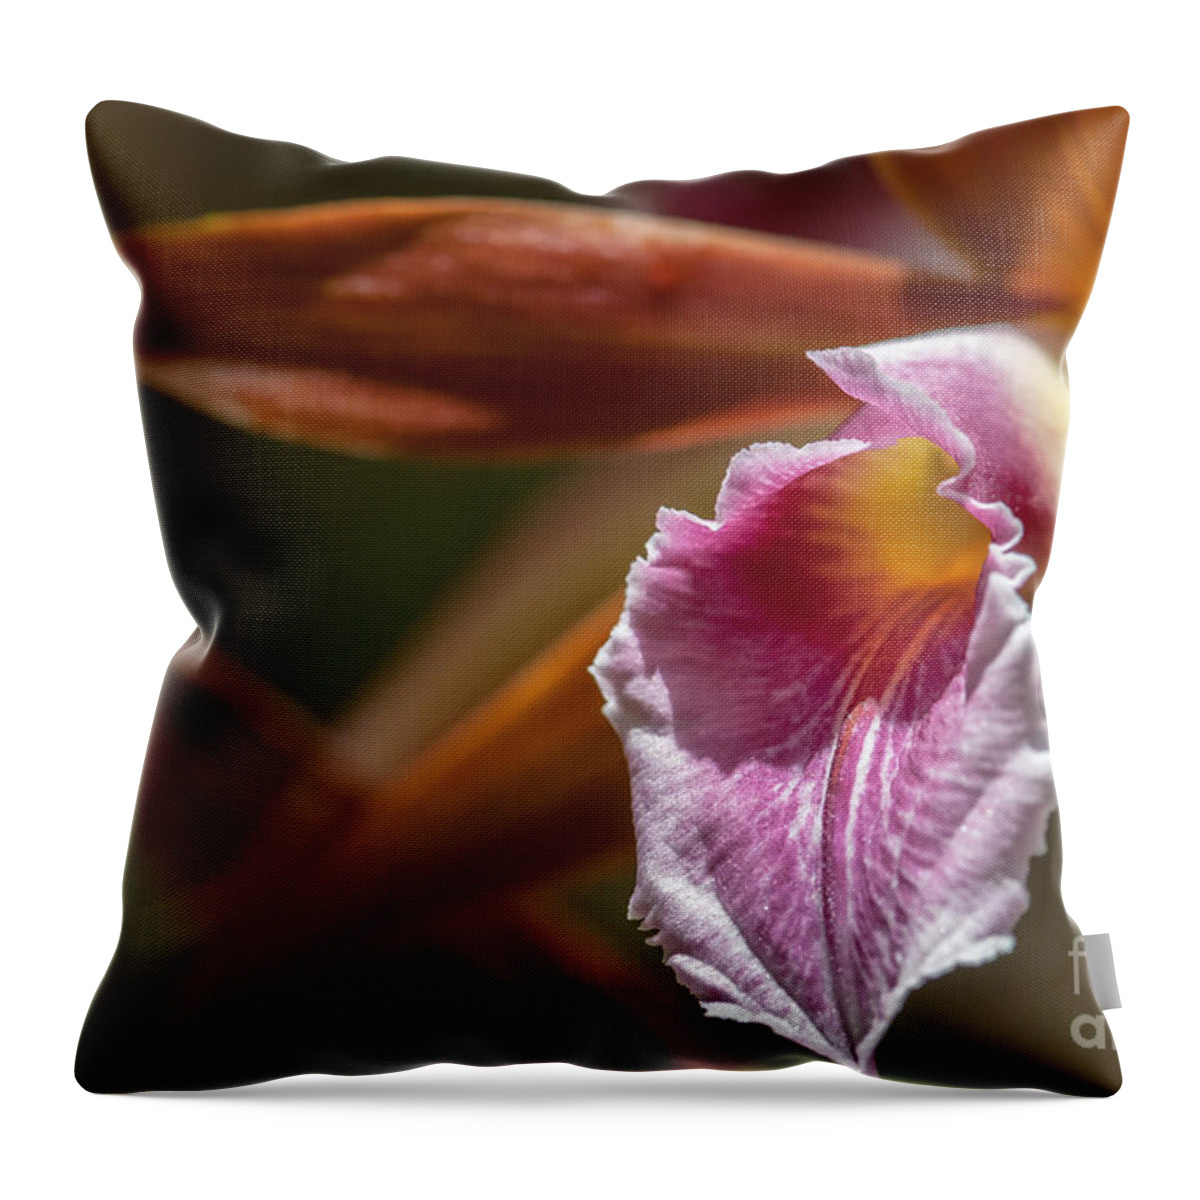 Al Andersen Throw Pillow featuring the photograph Phaius Tankervilleae Orchid by Al Andersen